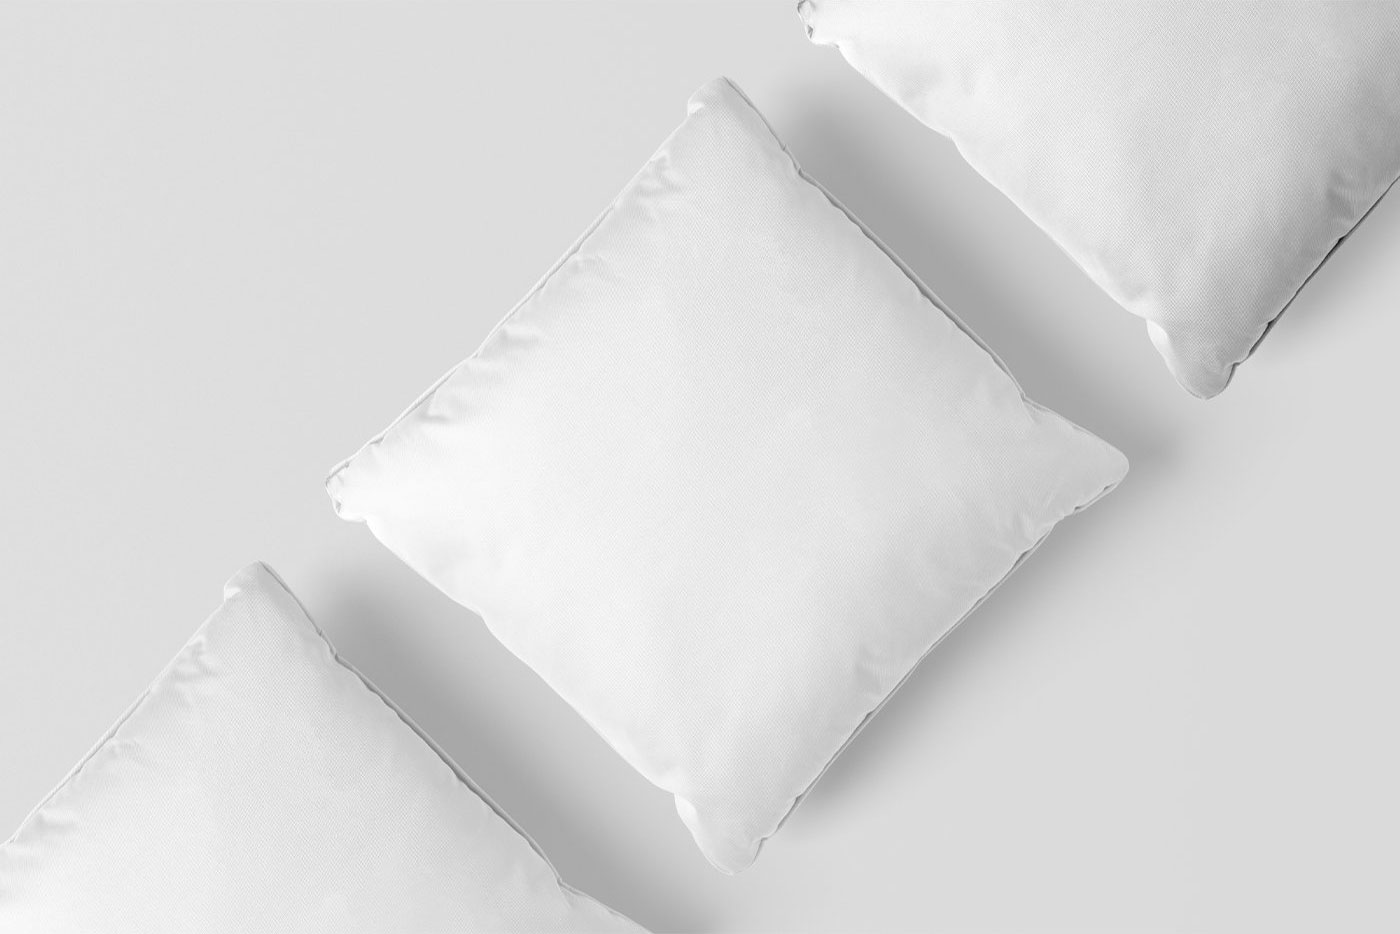 Top View of Square Pillow Mockup FREE PSD